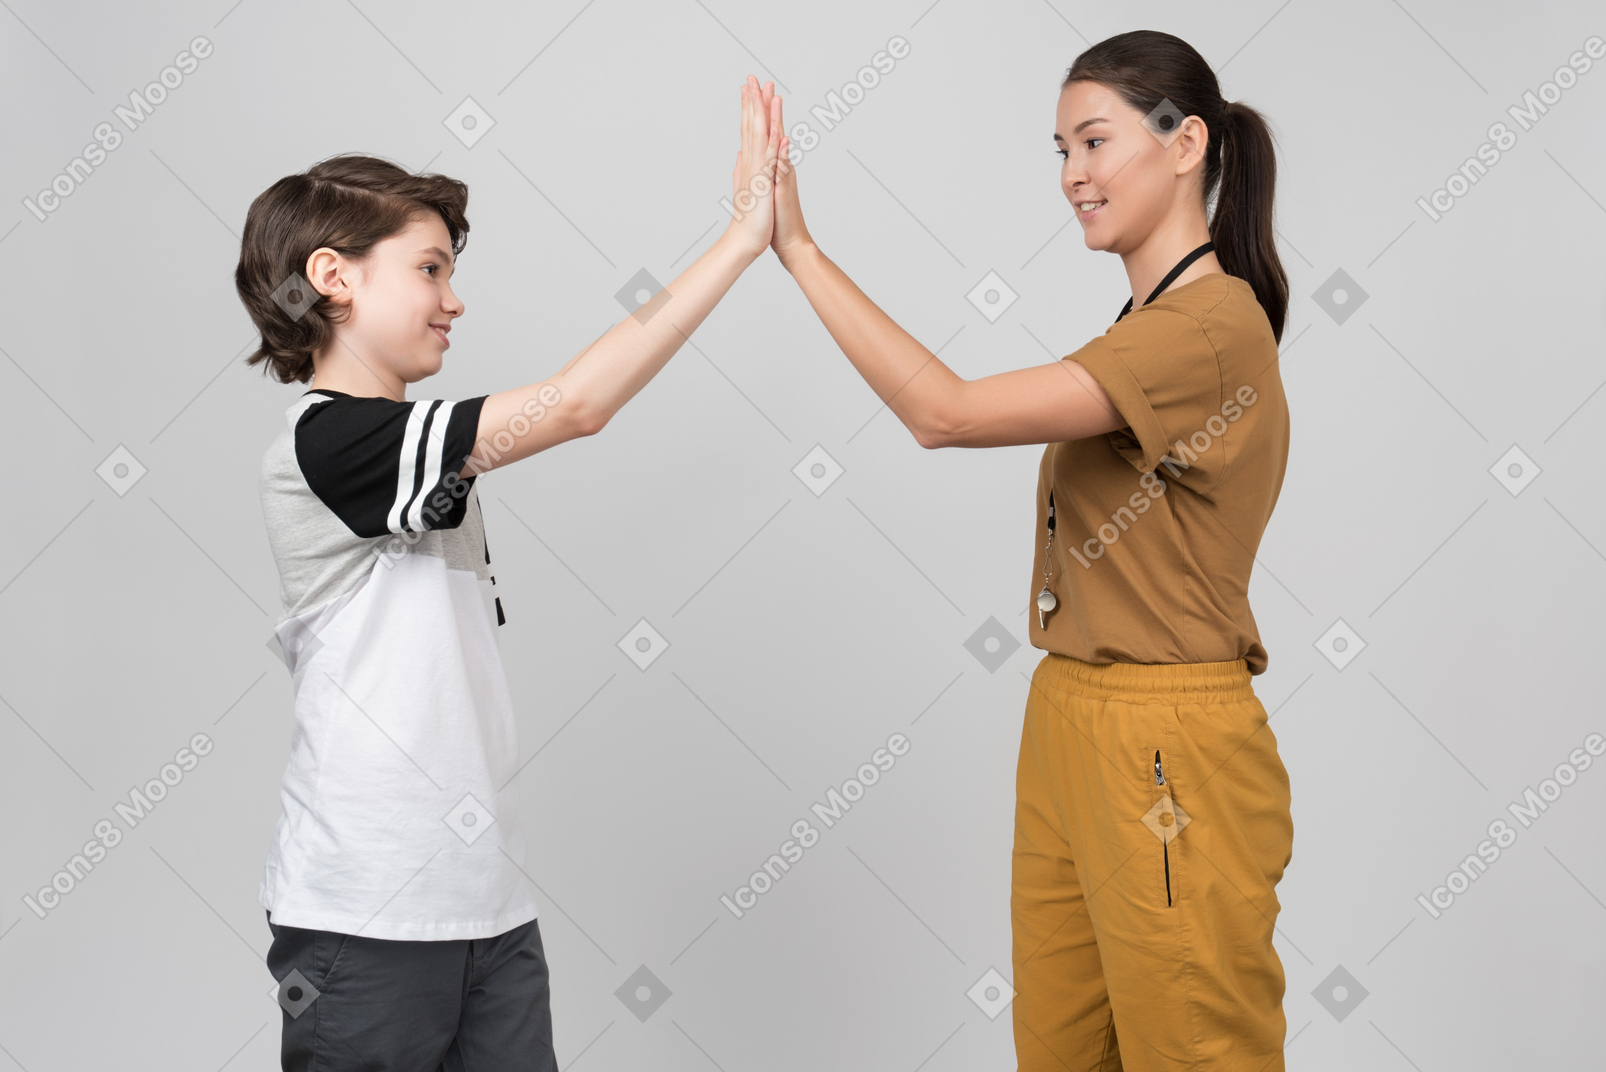 Pe teacher and pupil clapping hands together